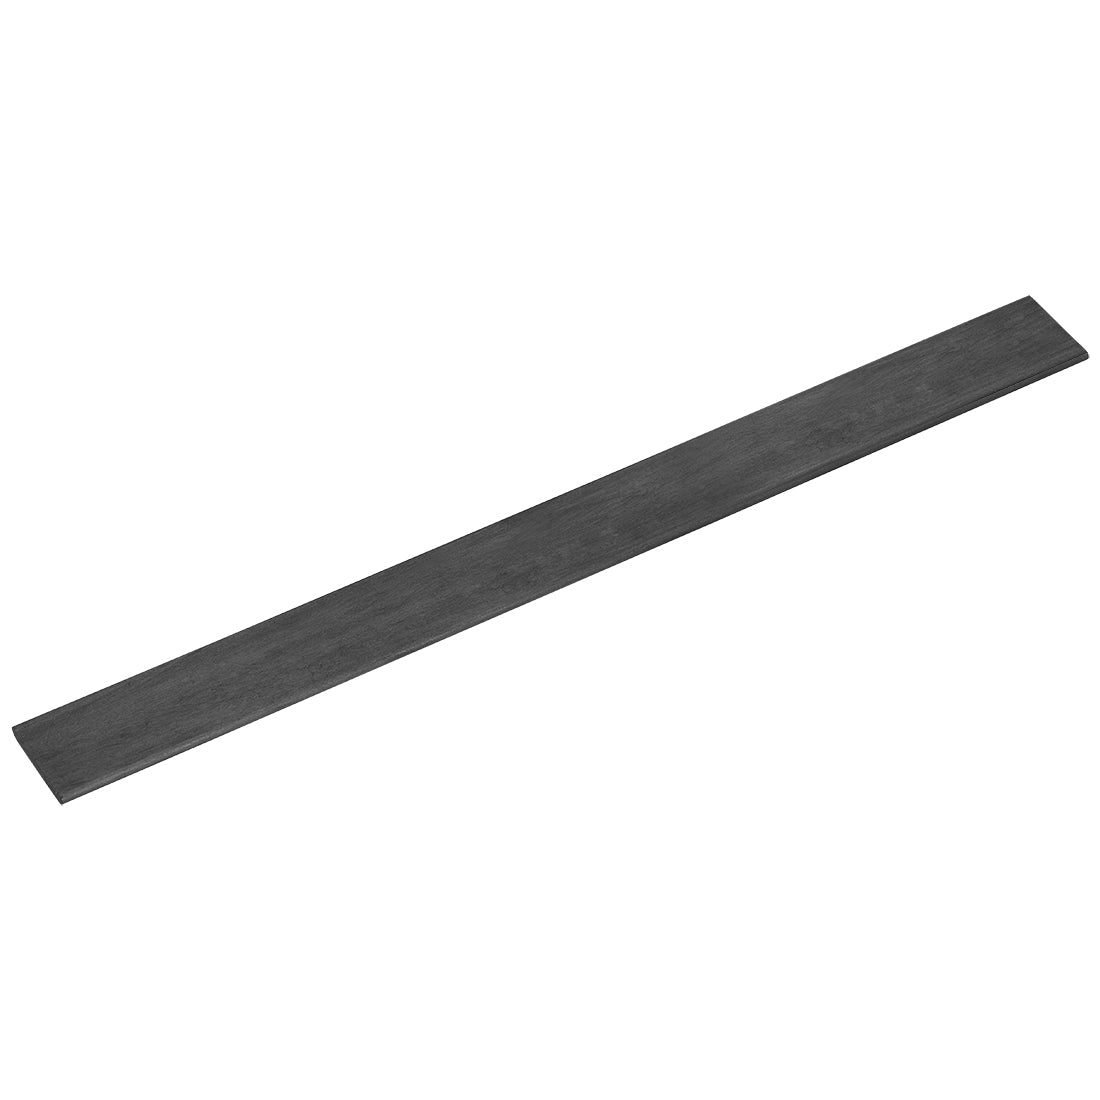 uxcell Uxcell Carbon Fiber Strip Bars 2x19mm 200mm Length Pultruded Carbon Fiber Strips for Kites, RC Airplane 1 Pcs